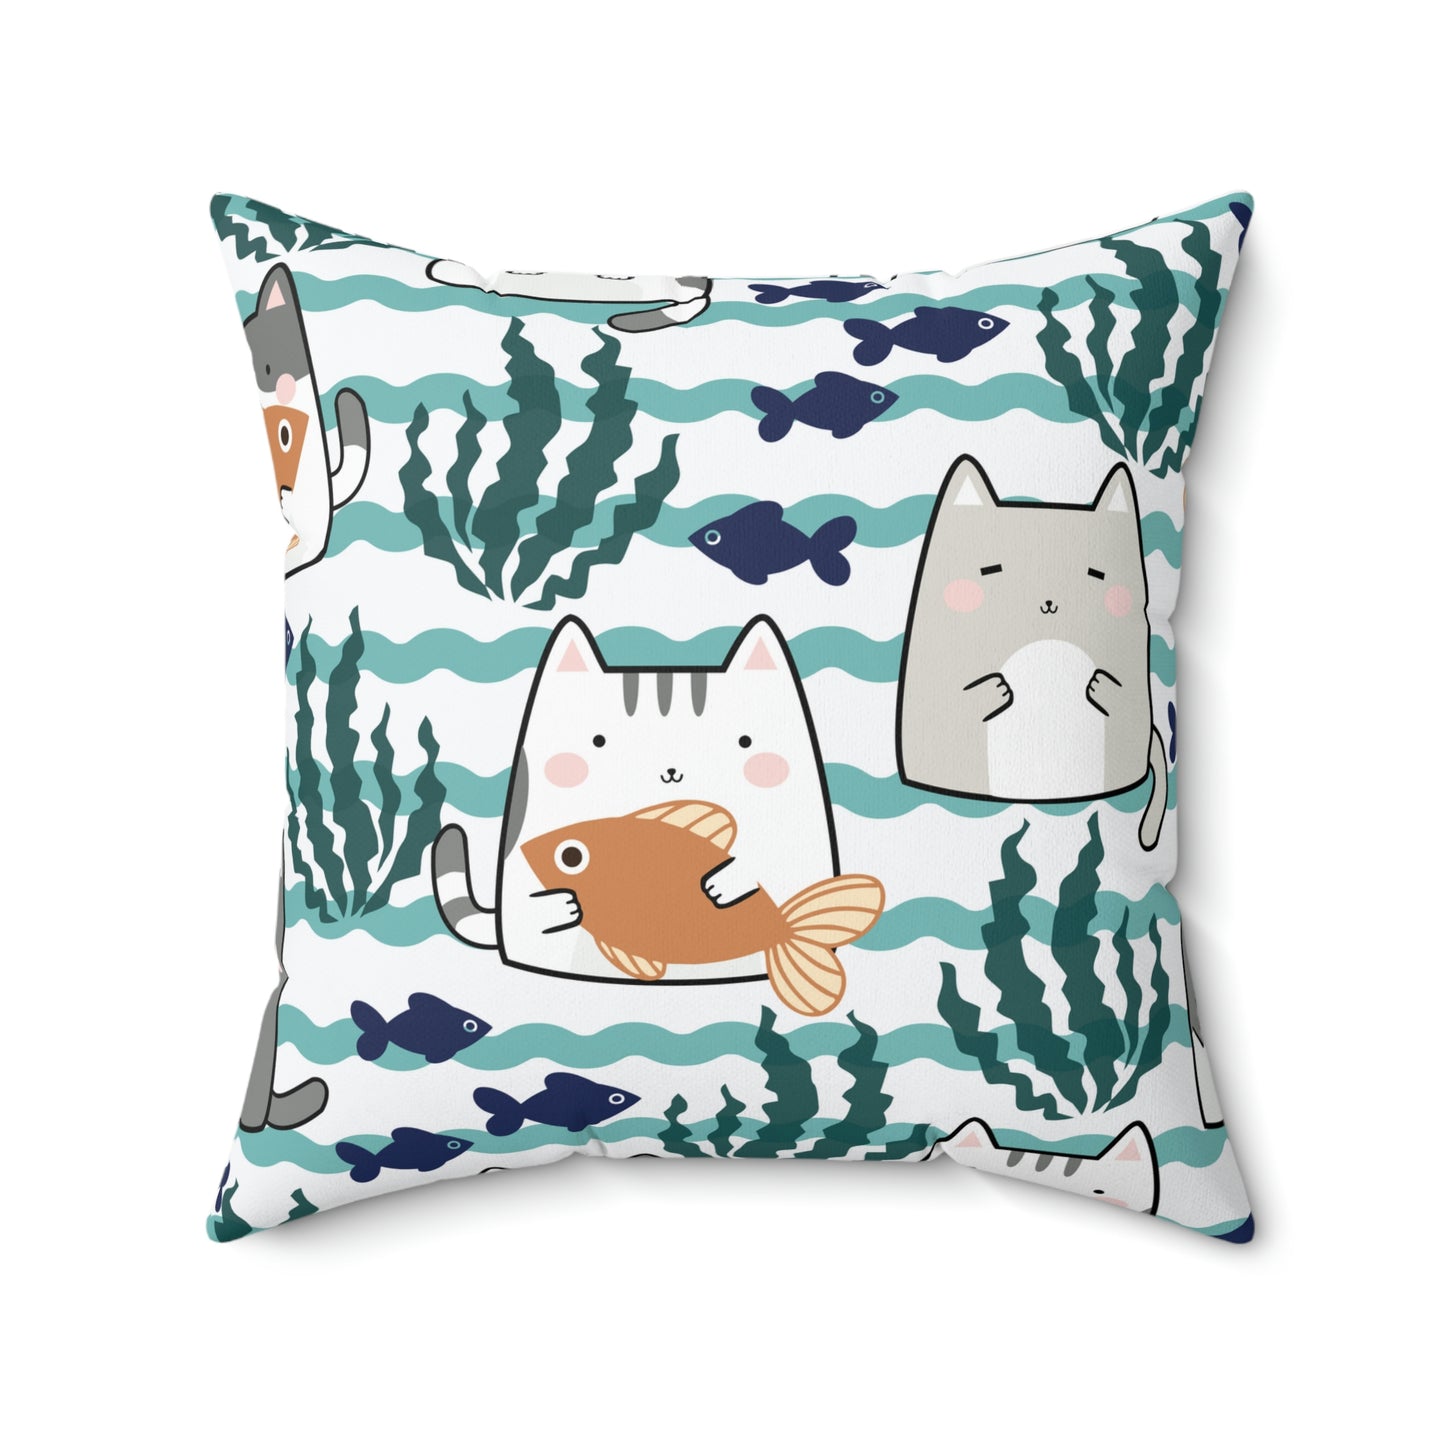 Kawaii Cats and Fishes Spun Polyester Square Pillow